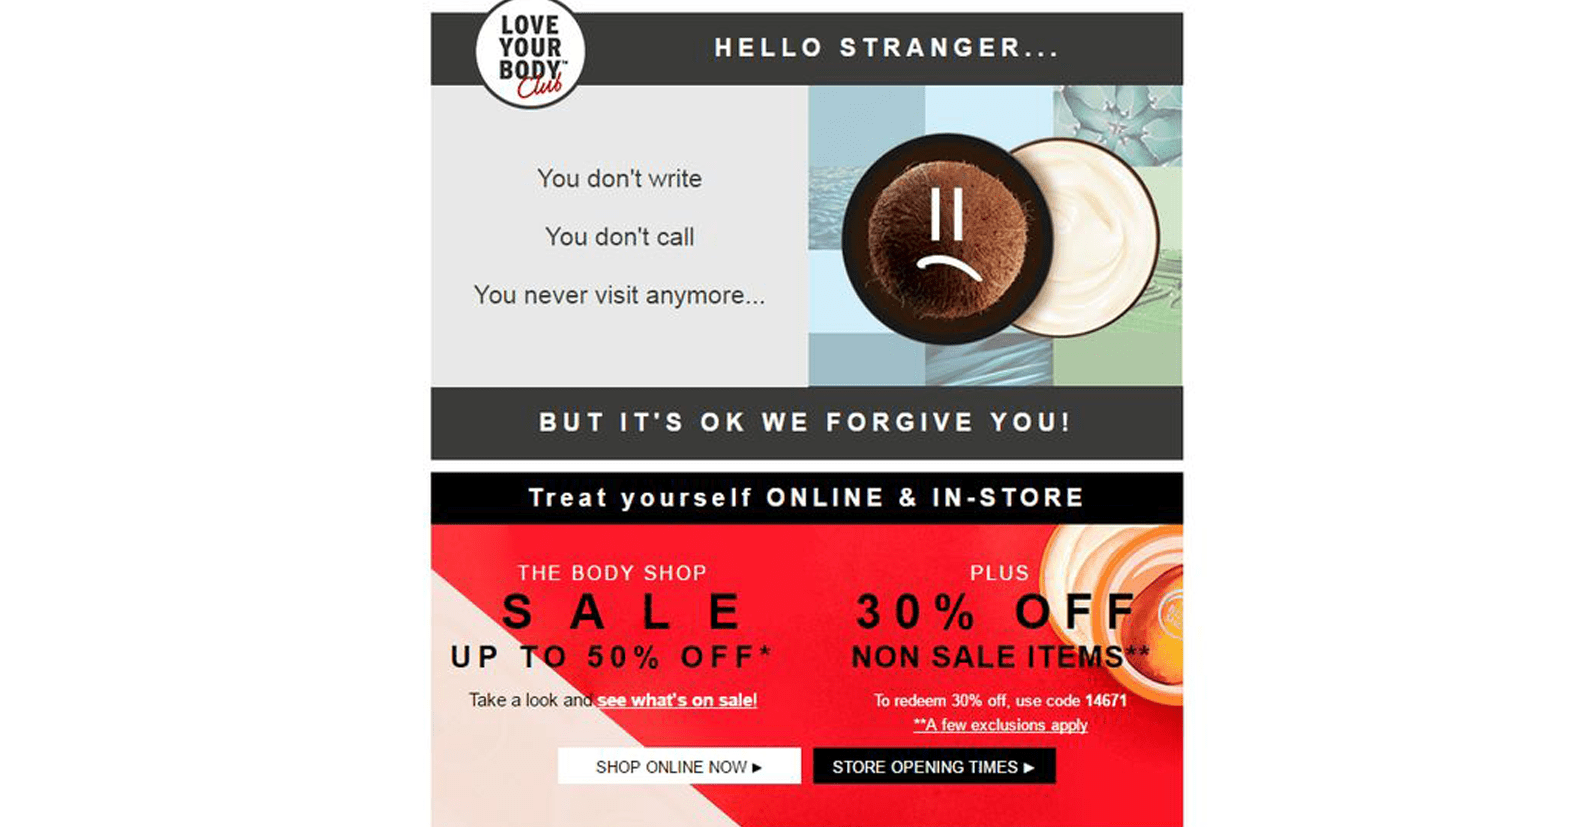 The Body Shop reactivation email